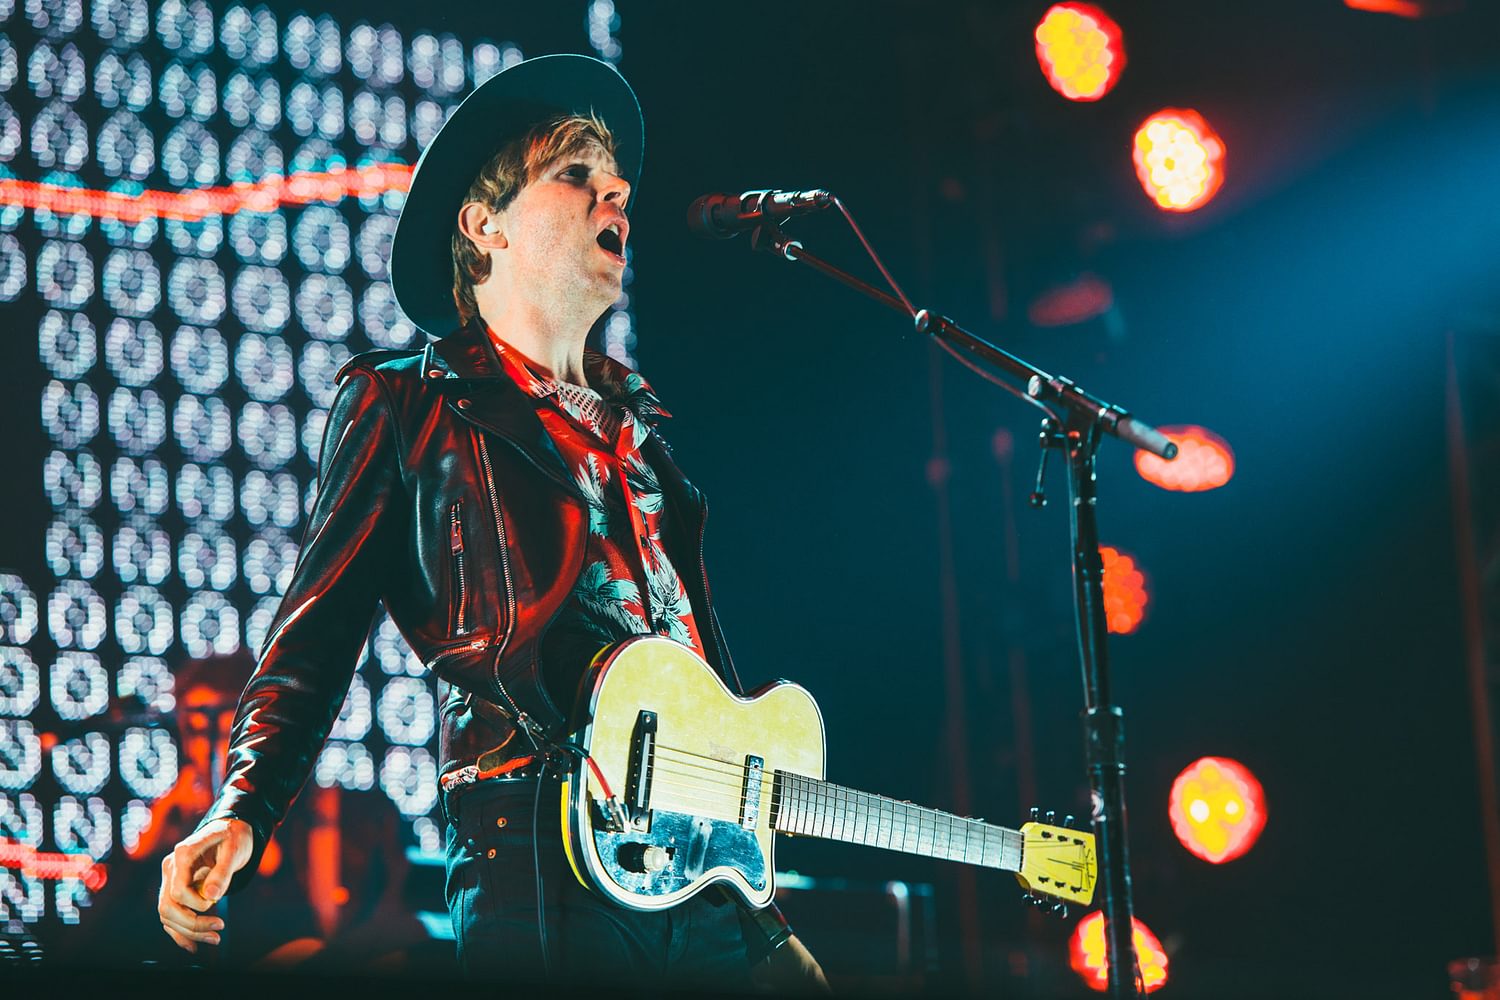 Watch Beck and Karen O cover Lou Reed at the Rock and Roll Hall of Fame induction